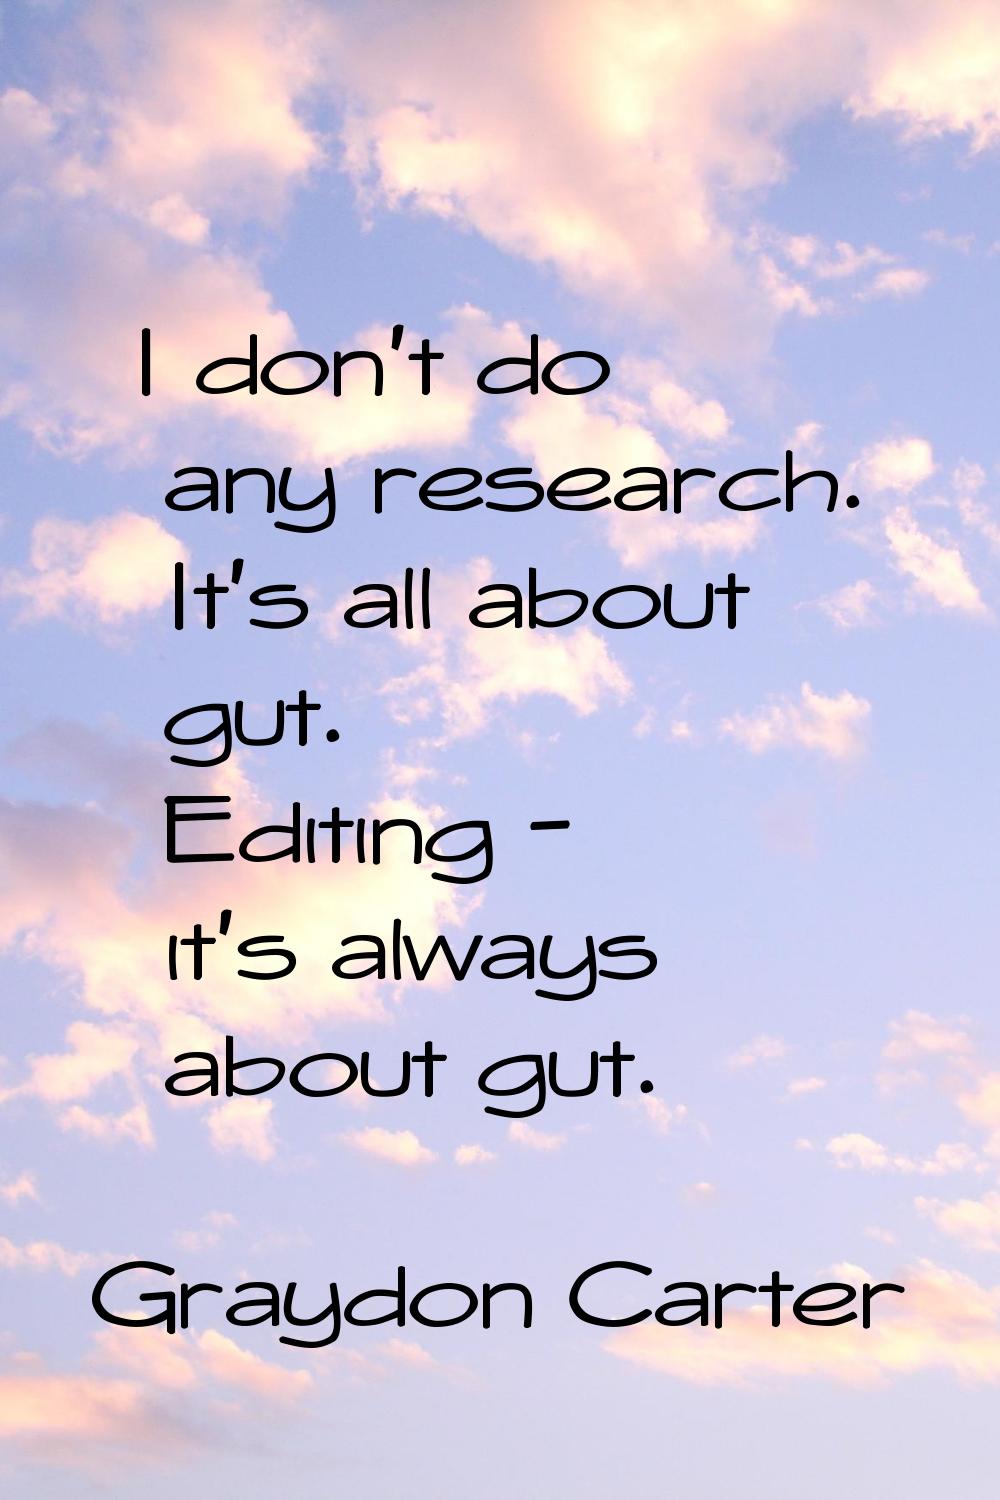 I don't do any research. It's all about gut. Editing - it's always about gut.